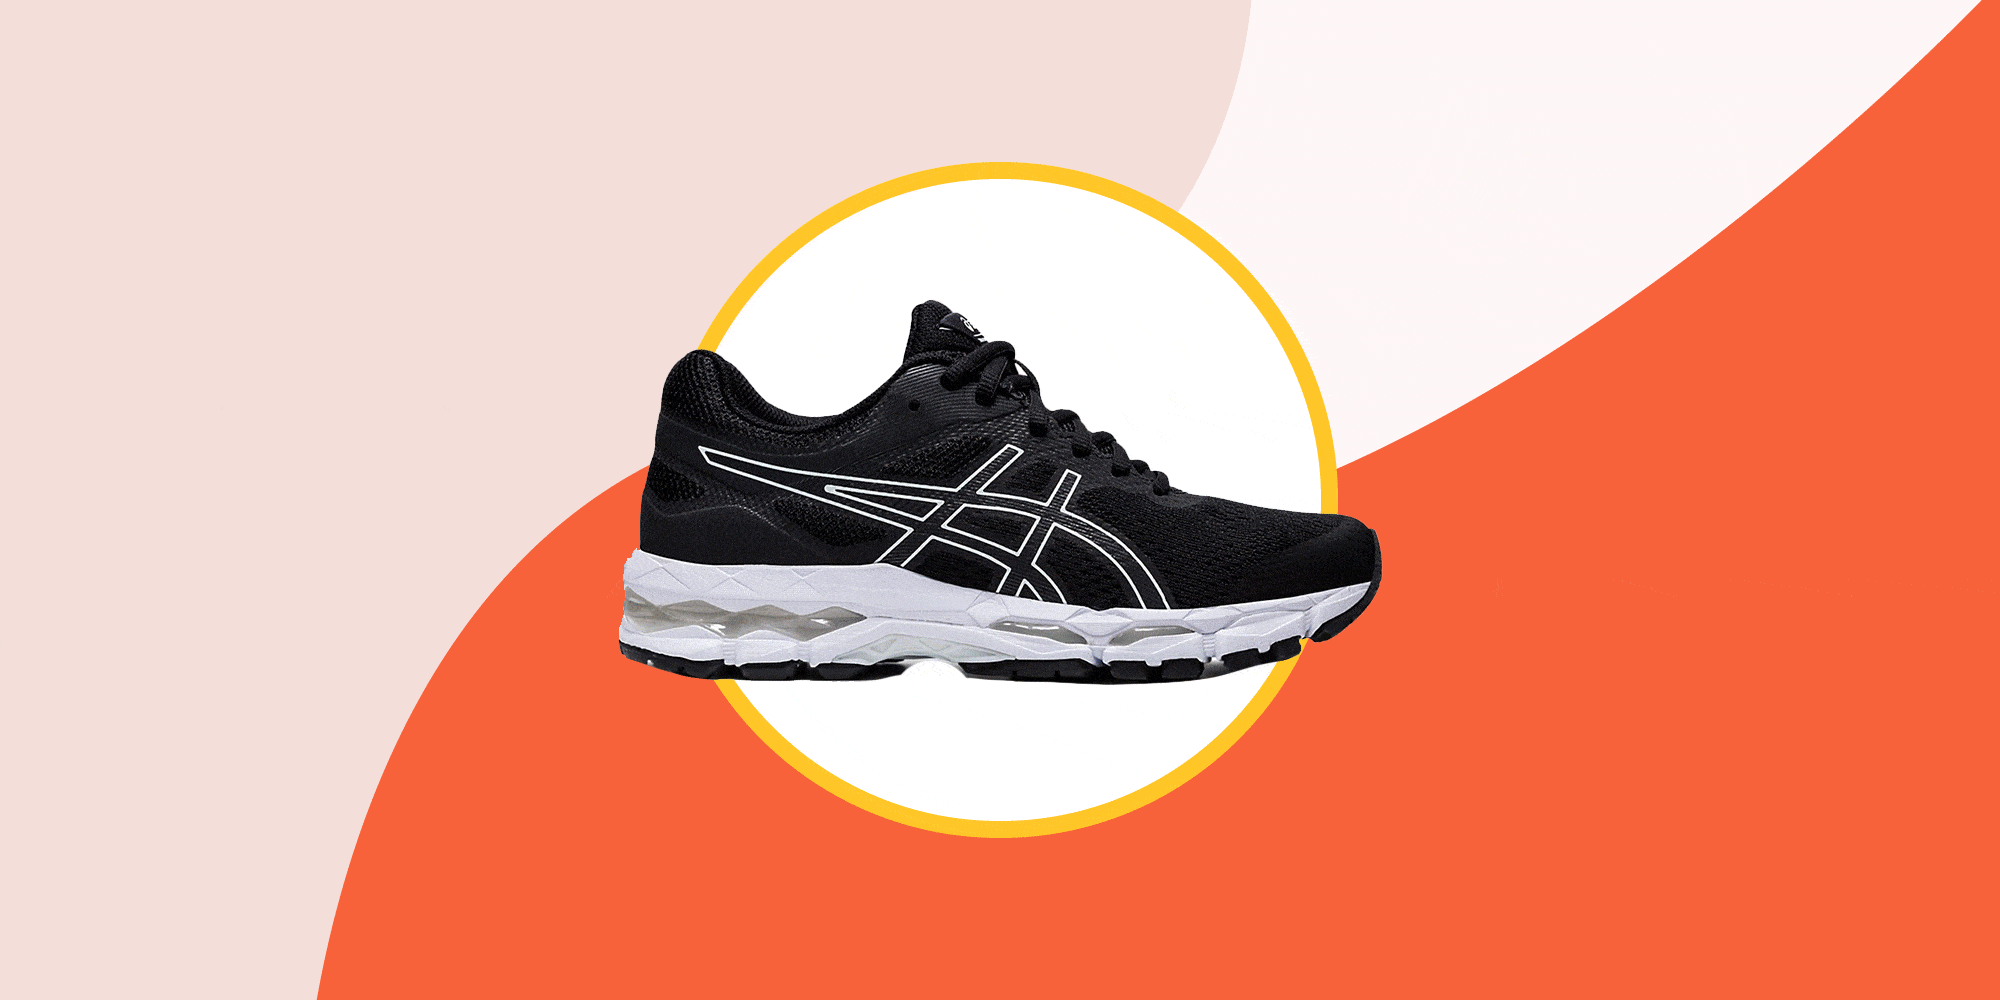 Asics Sale 2020 | Cheap Running Trainers